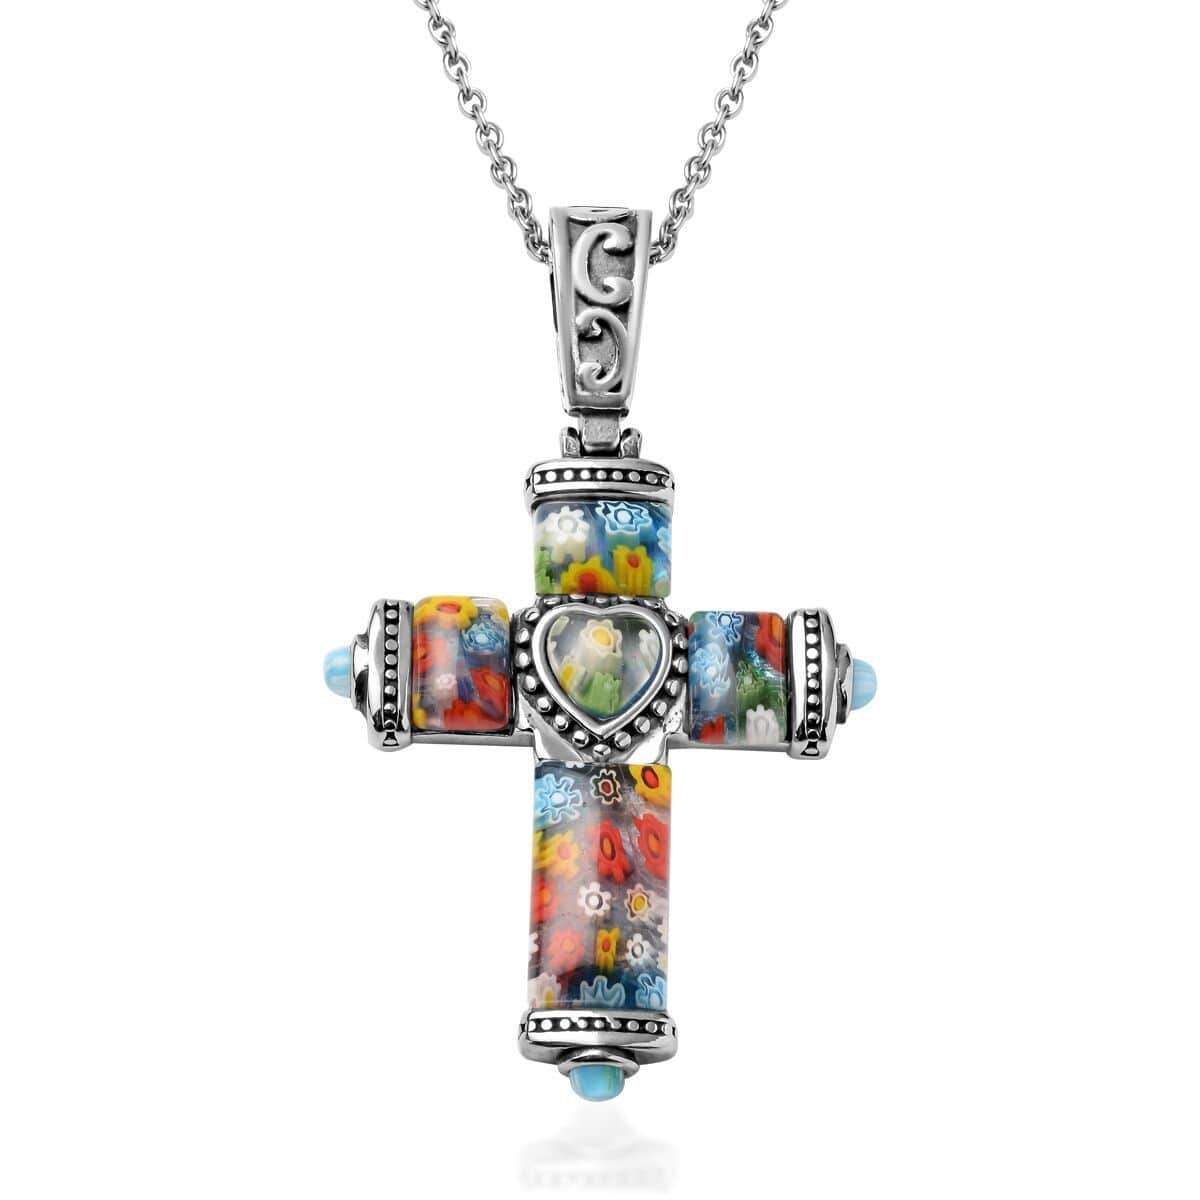 Murano Style Millefiori Glass Cross Pendant Necklace in Black Oxidized Stainless Steel Chain 20 Inches, Religious Pendant for Women and Men image number 0